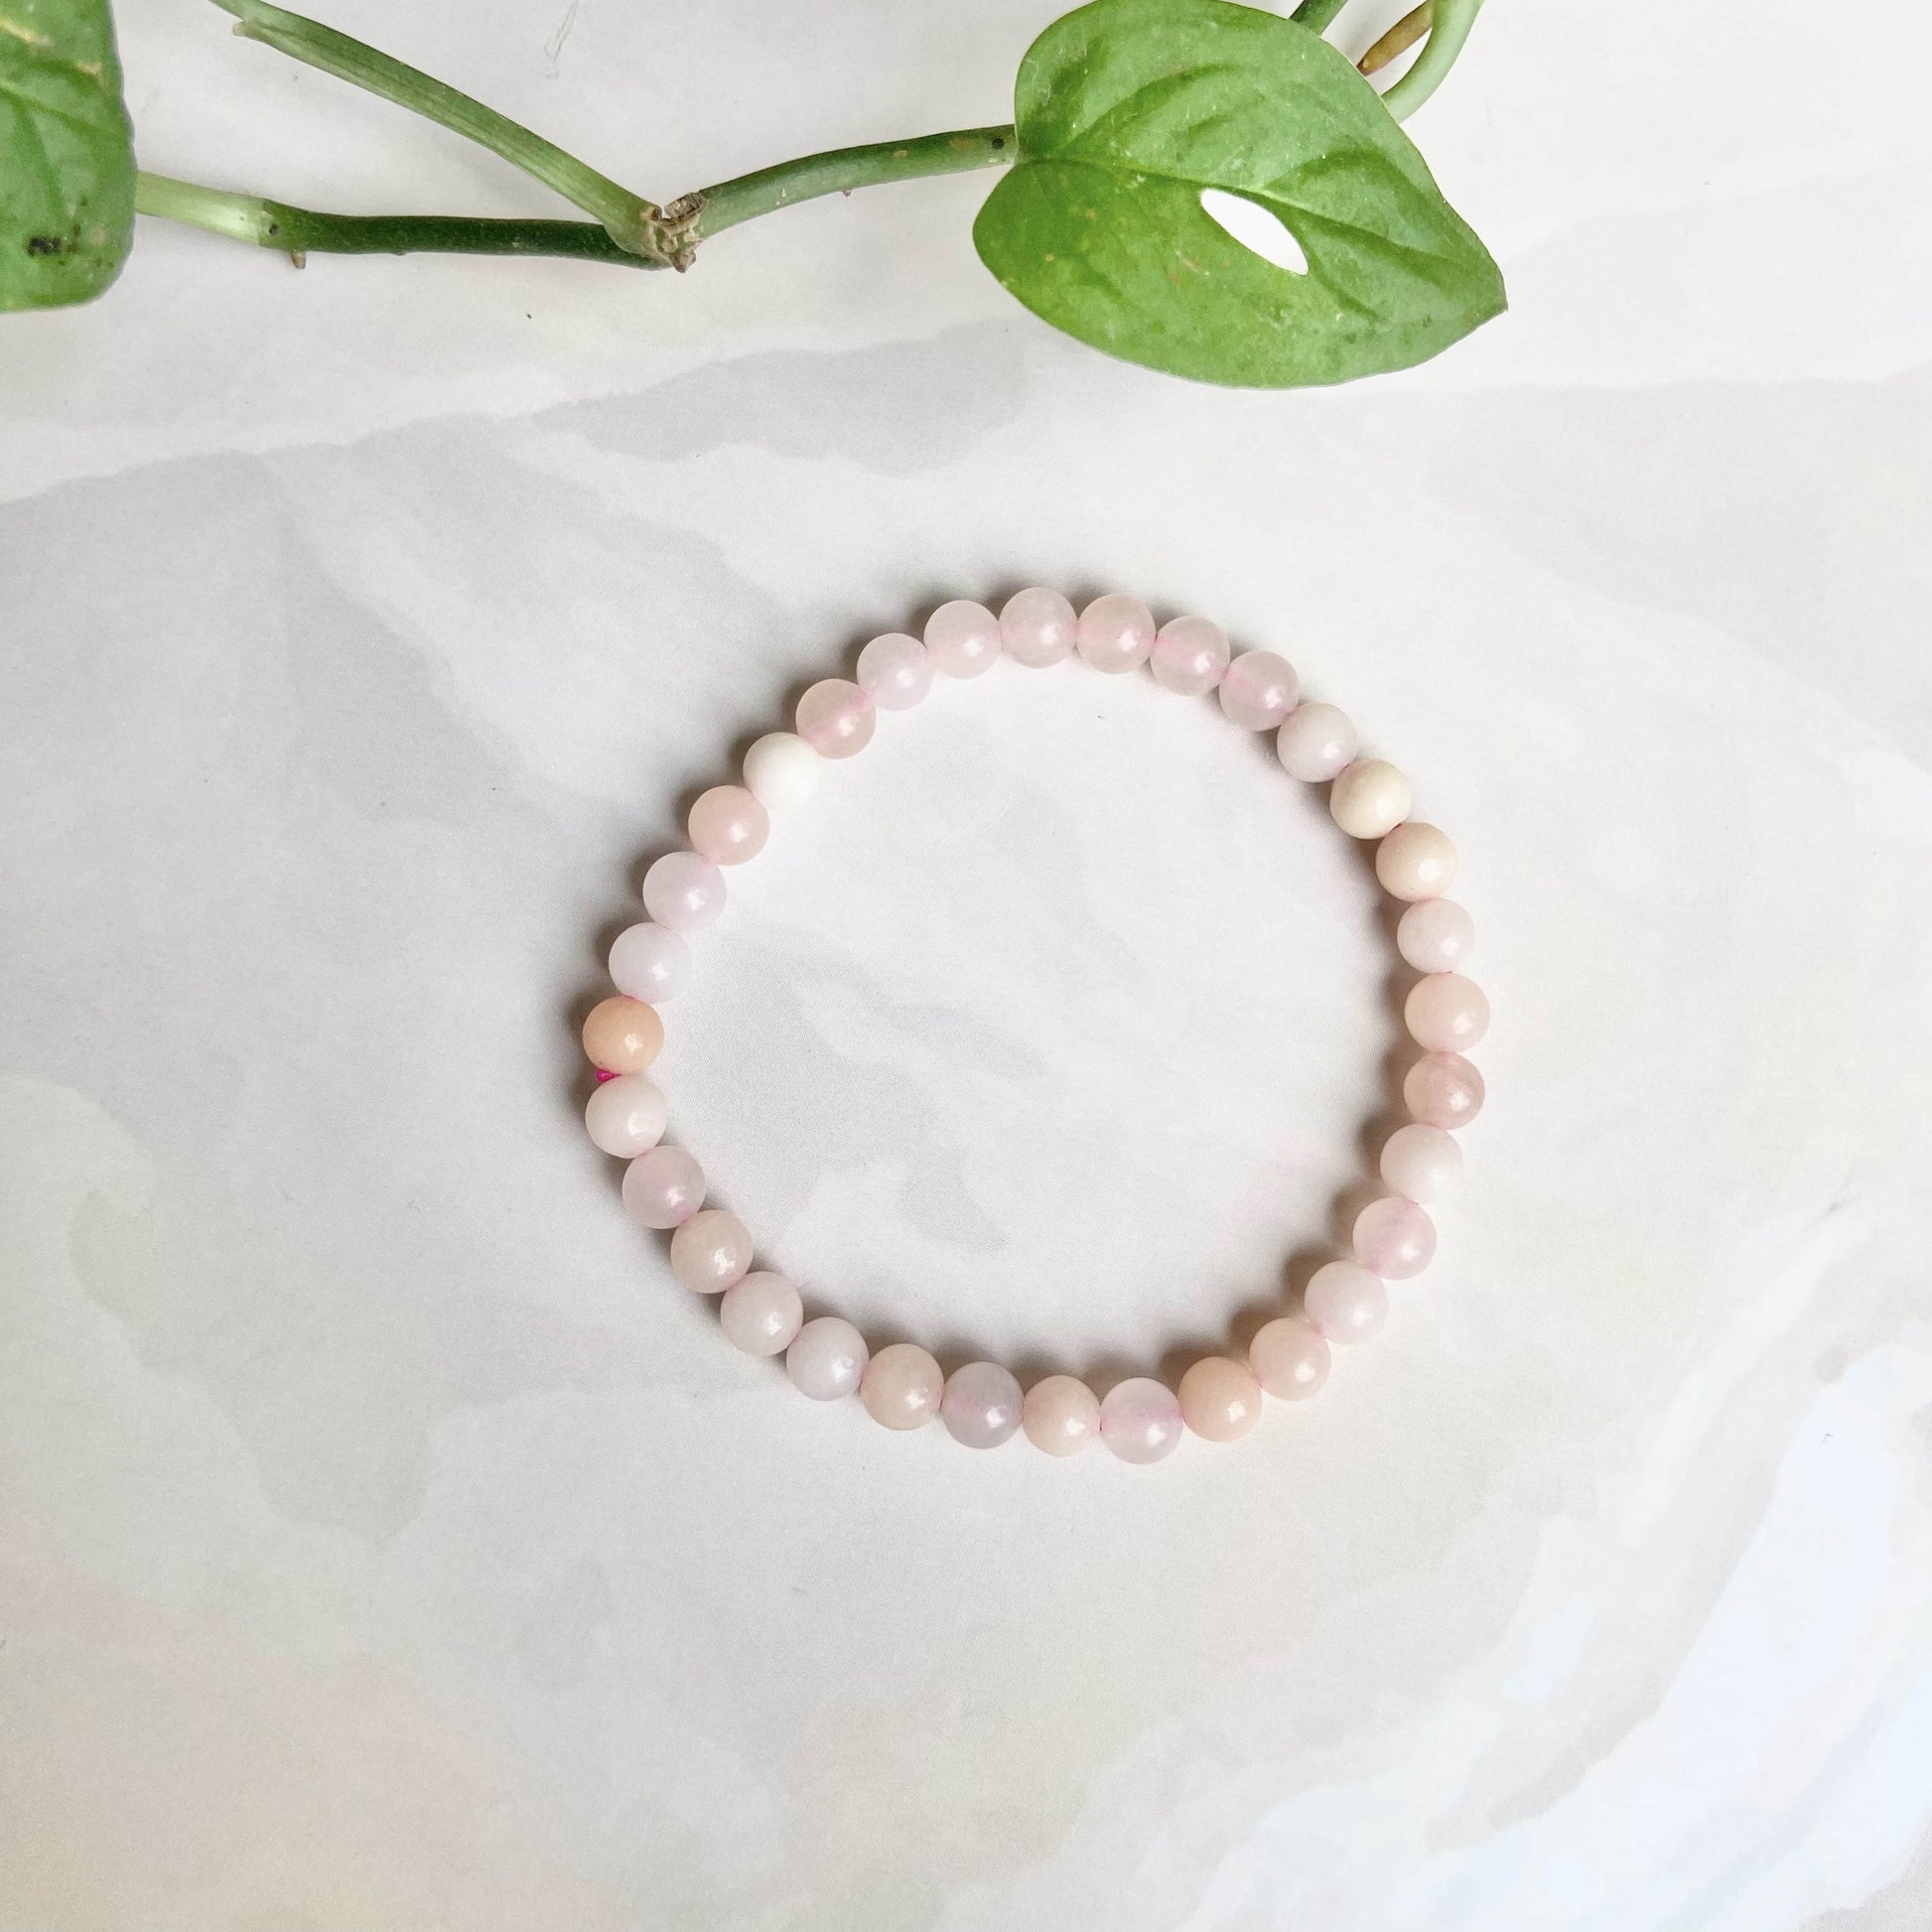 Pink Aventurine Bead Bracelet - 6Mm | Helps Ease Anxiety And Balance Heart Chakra Crystal & Stones